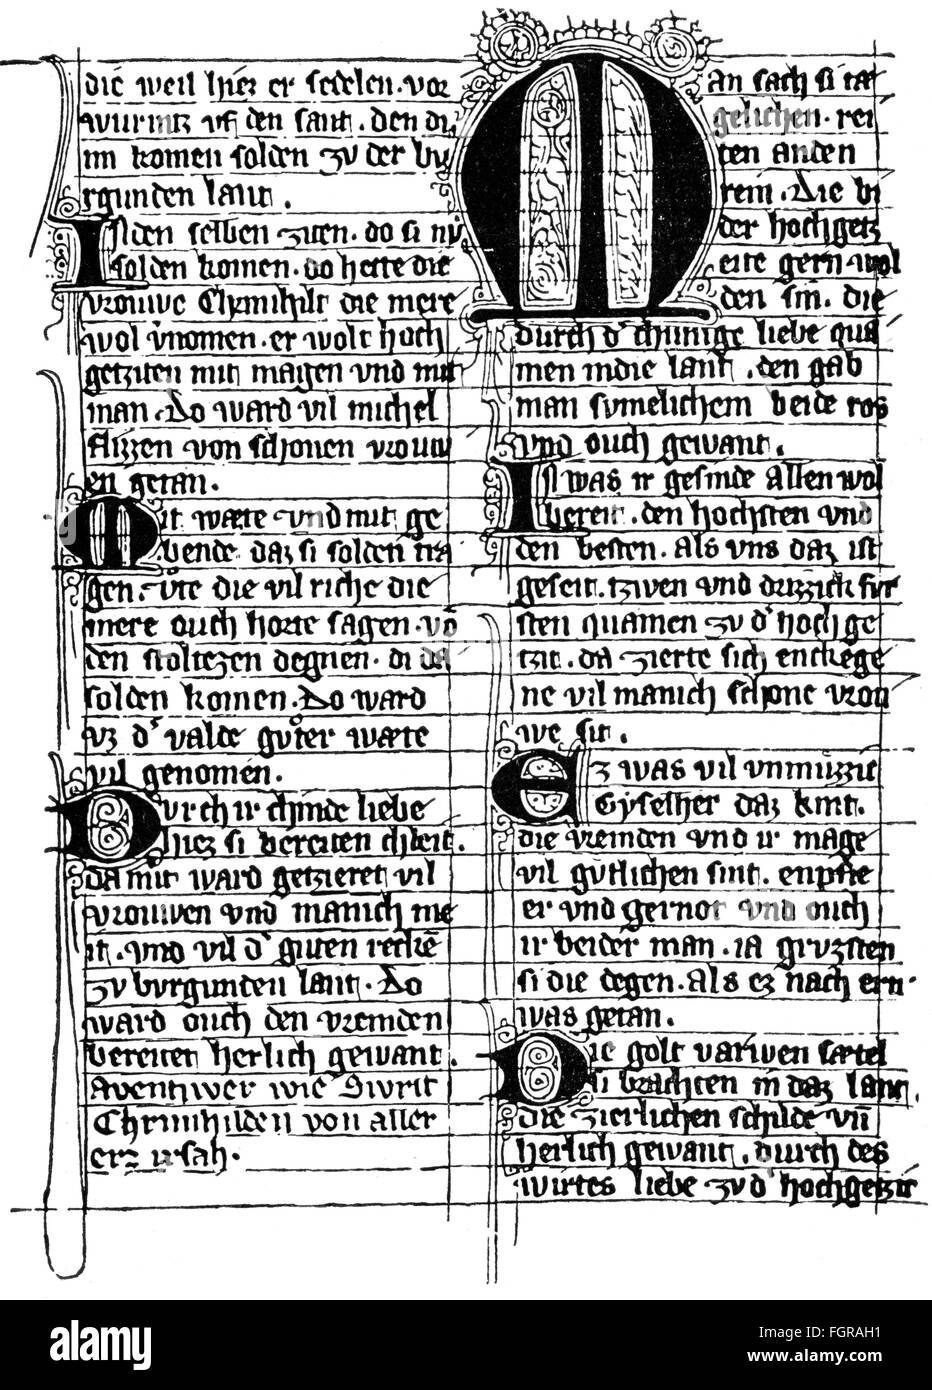 literature, The Nibelungen (Nibelung), manuscript D, early 14th century, Bavarian State Library, Munich, 14th century, Middle Ages, medieval, mediaeval, Germany, literature, lyric poetry, lyrics, The Song of the Nibelungs, mythology, myth, myths, legend, saga, legends, sagas, epic poem, epos, epopee, national epic, heroic epic, heroic epics, graphic, graphics, ornament, ornaments, initial, initials, script, scripts, manuscript, handwriting, handwritings, Middle High German, verse, verses, historic, historical, Additional-Rights-Clearences-Not Available Stock Photo